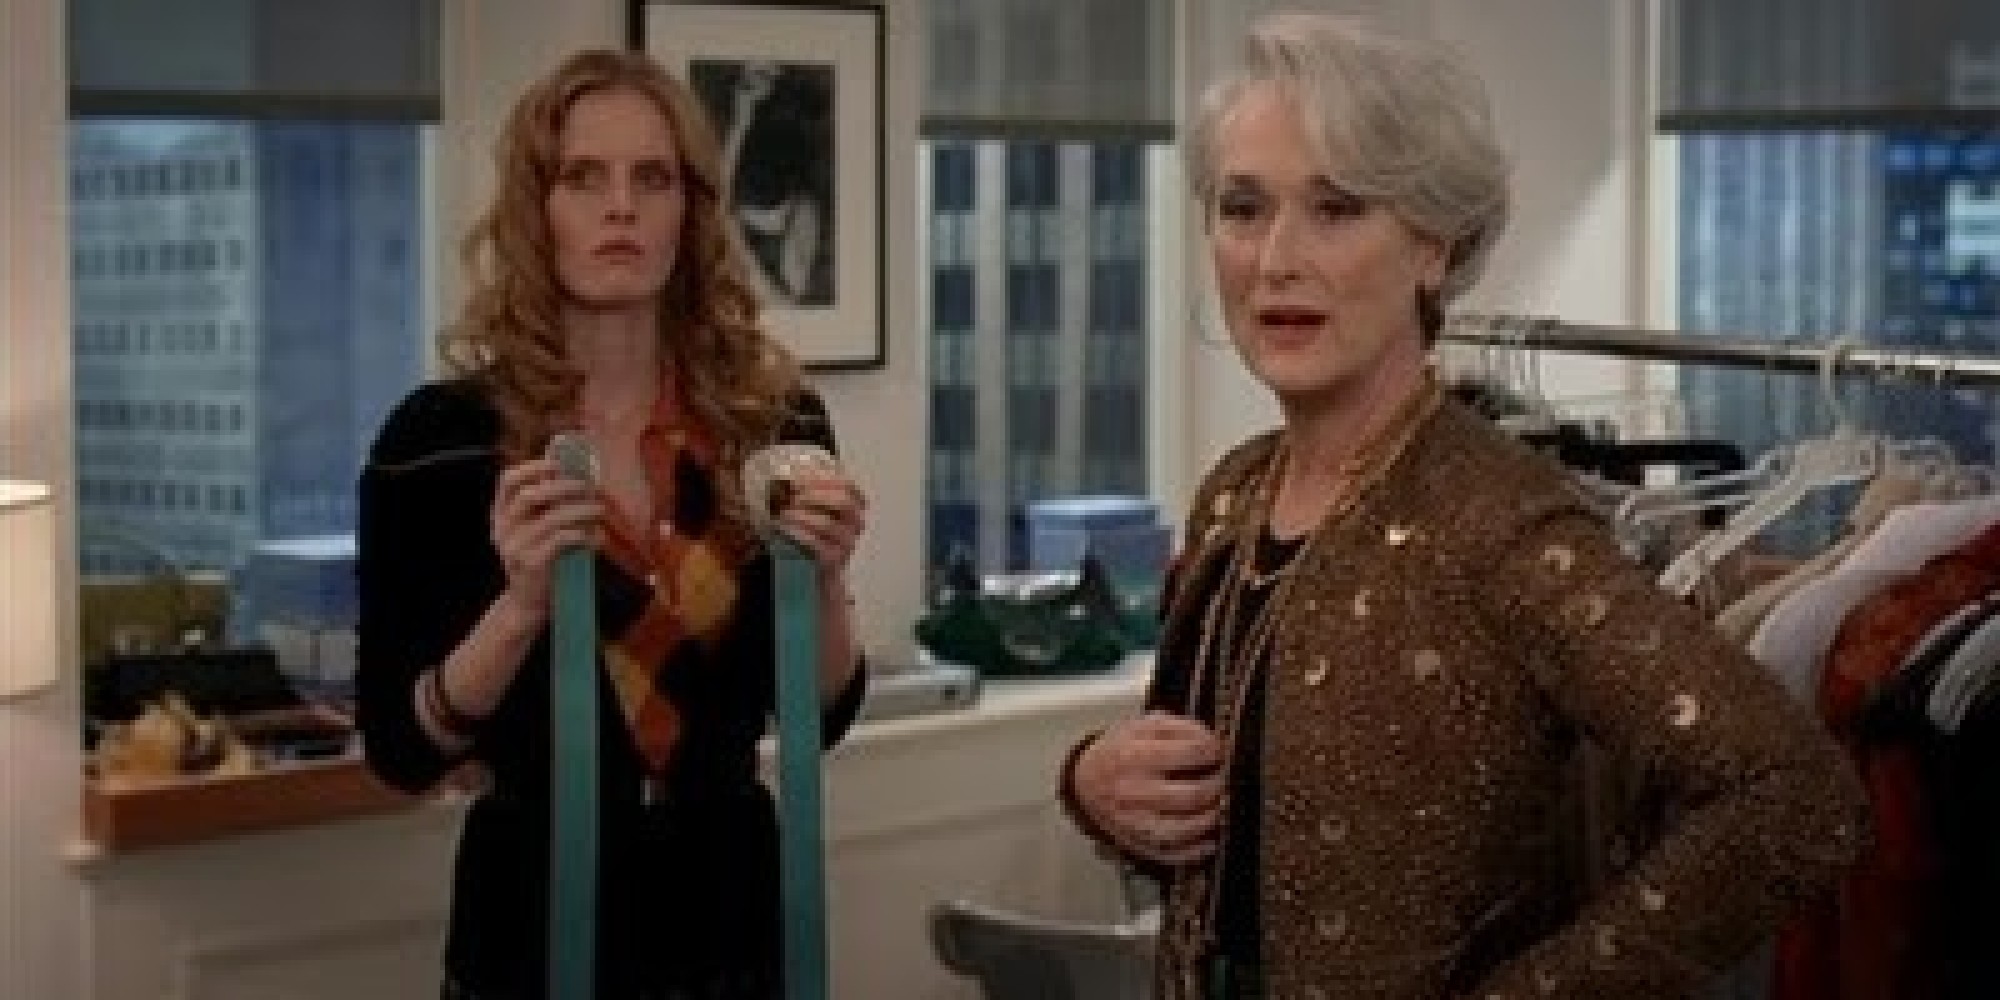 What That Famous Devil Wears Prada Scene Actually Gets